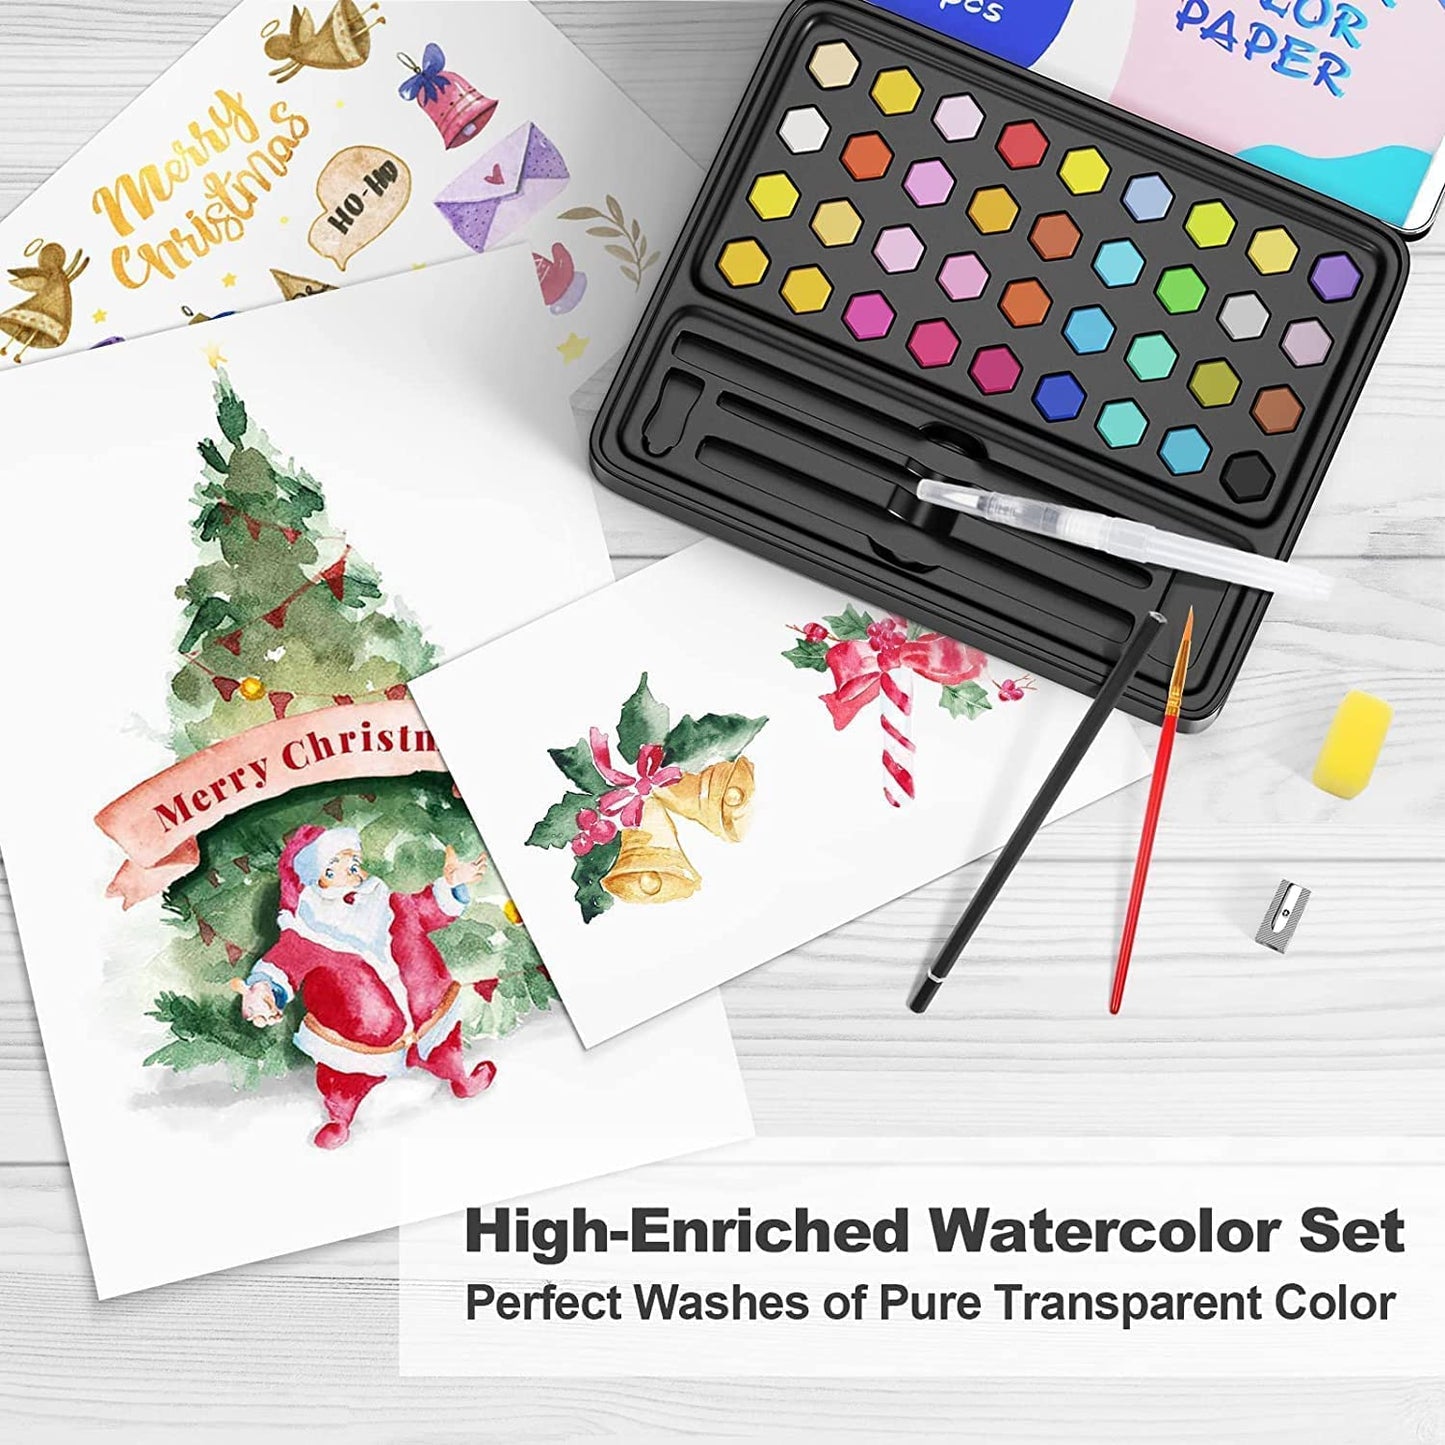 NAQASO Watercolor Painting Set, 36 WaterColors Kit with 1 Nylon & 1 water Brush, 10 Watercolor Papers, 1 Sponge, 1 Pencil, Sharpner & Bag, Painting Supplies for Kids, Adults, Beginners & Artists